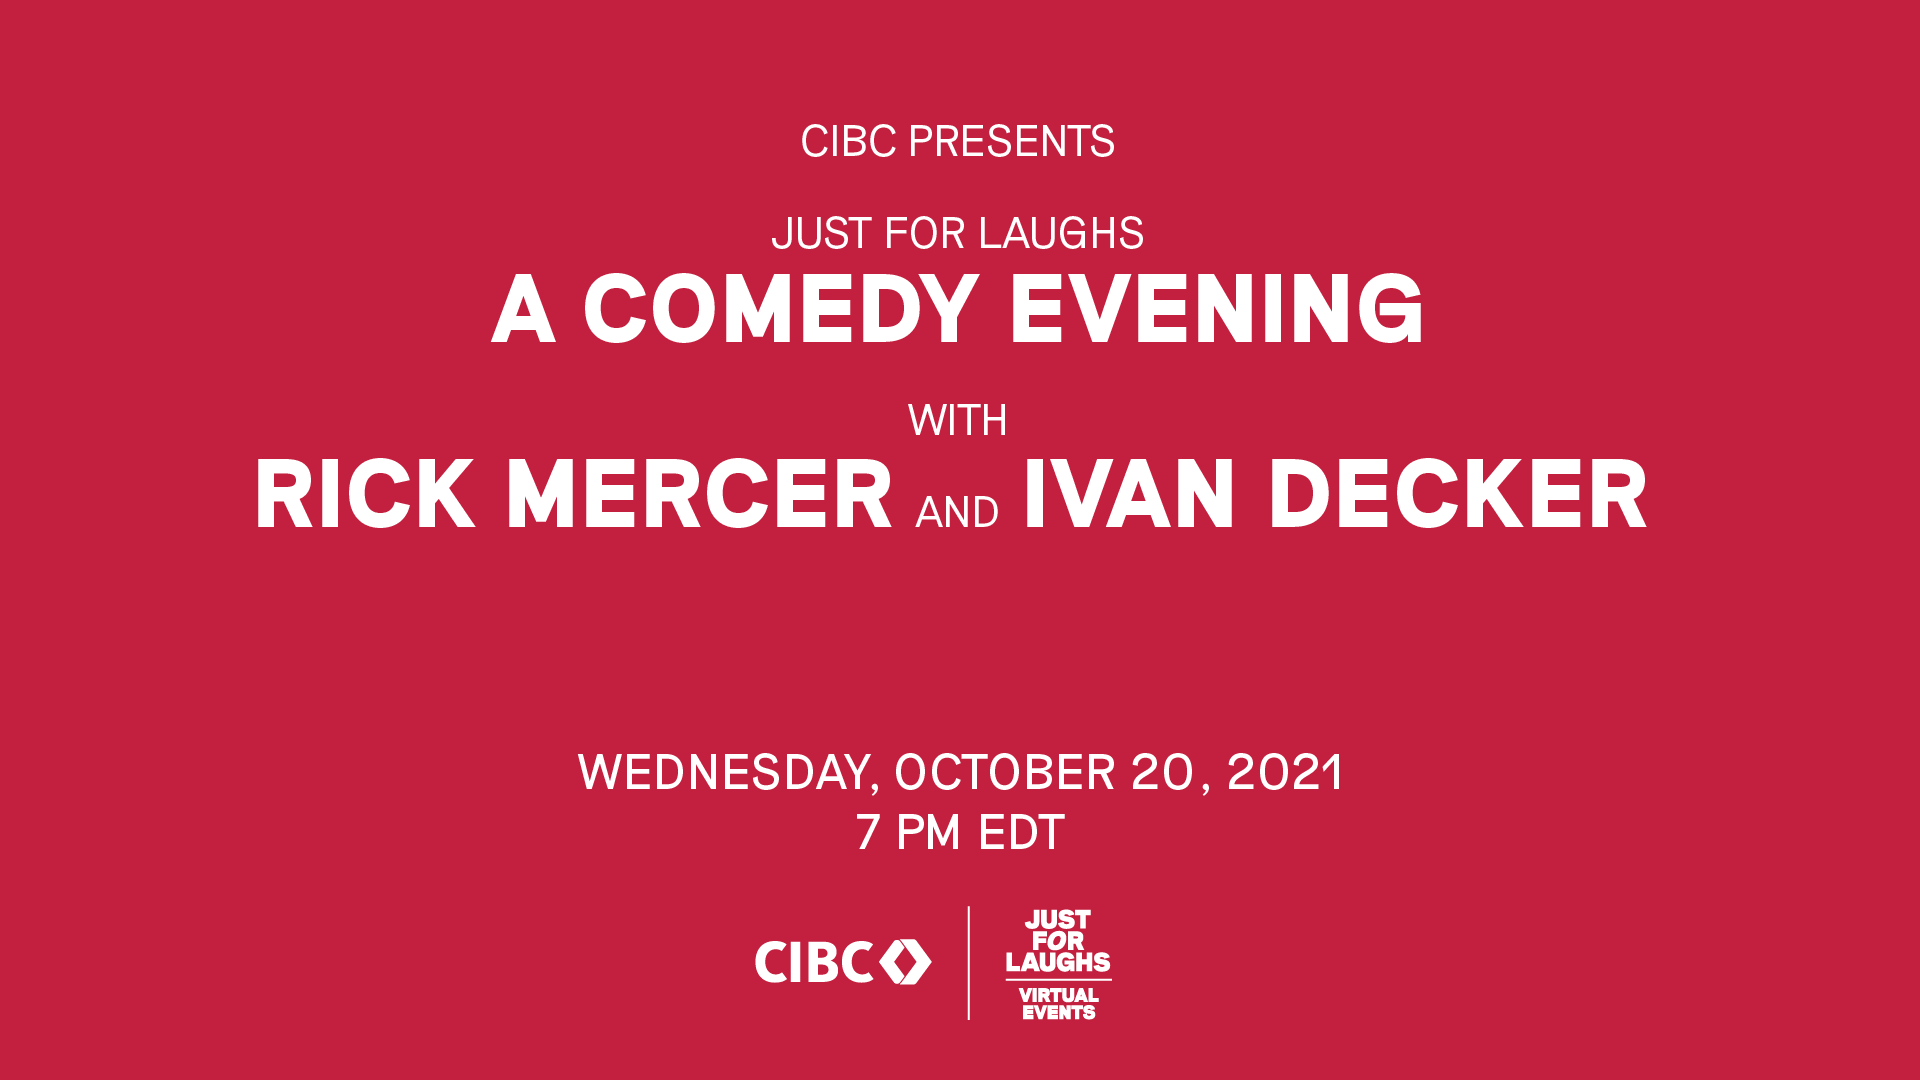 Just For Laughs: A Comedy Evening with Rick Mercer and Ivan Decker